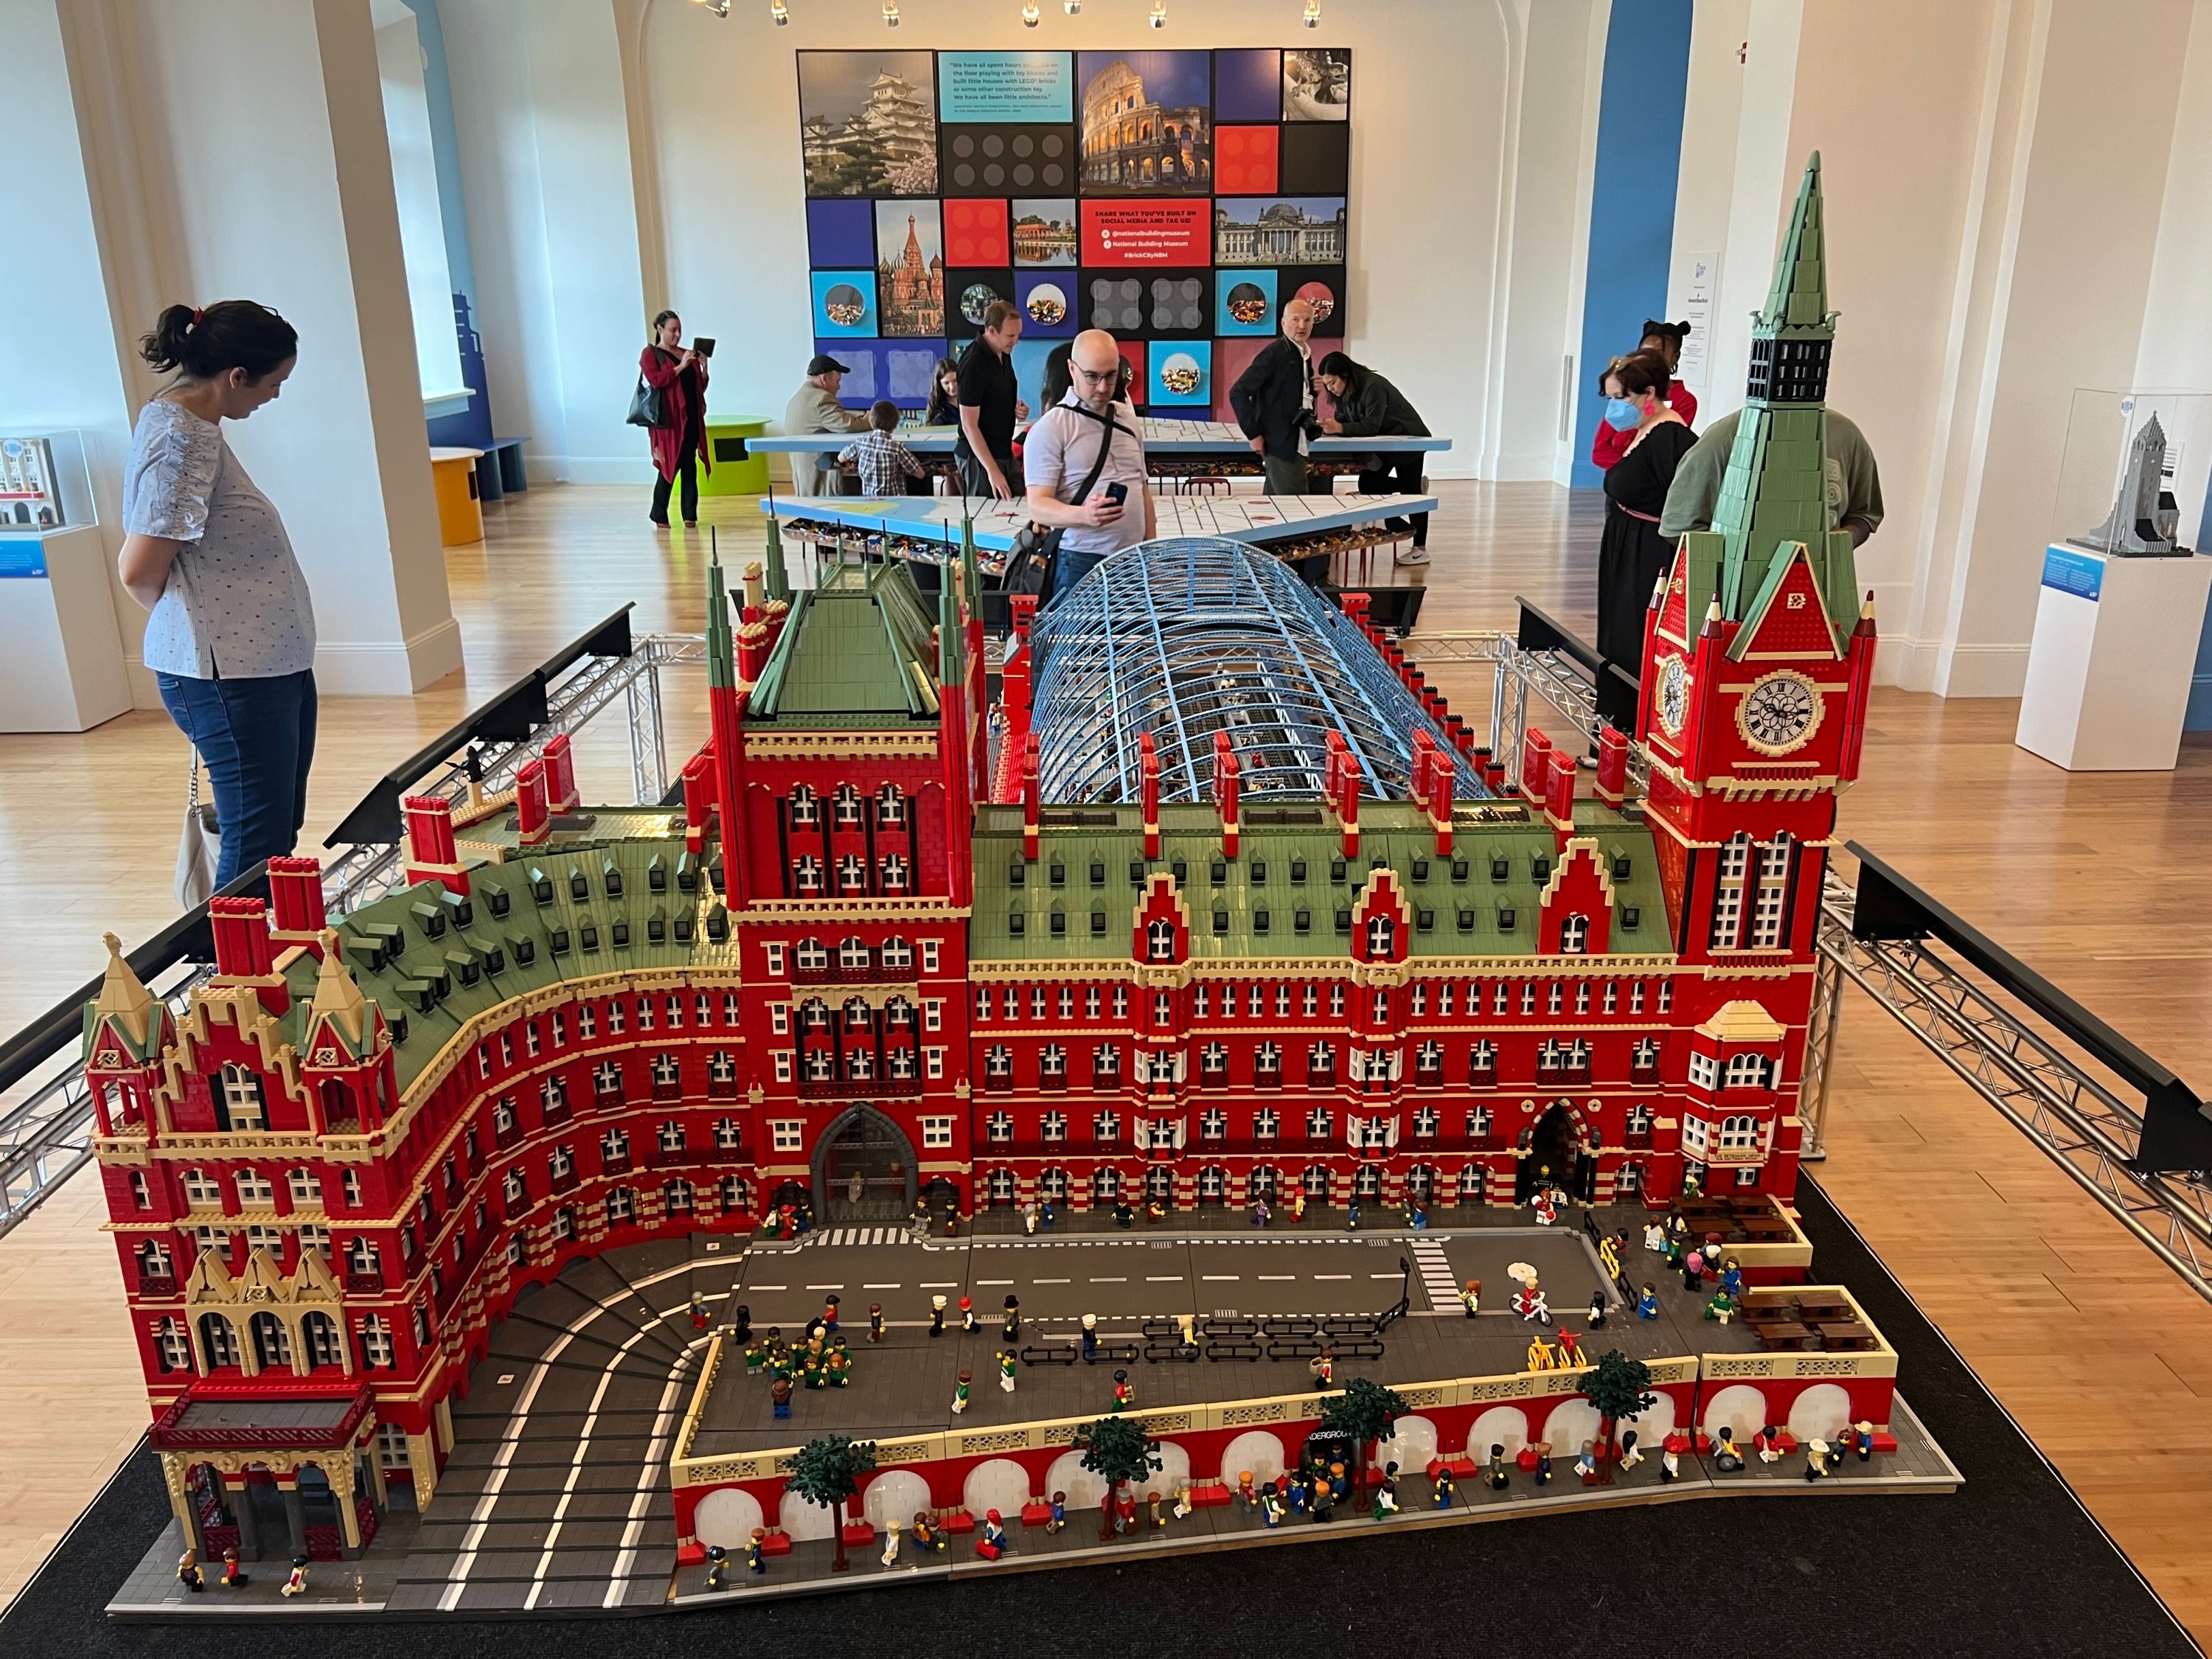 10 Amazing Lego Creations You’ll See at the National Building Museum’s ...